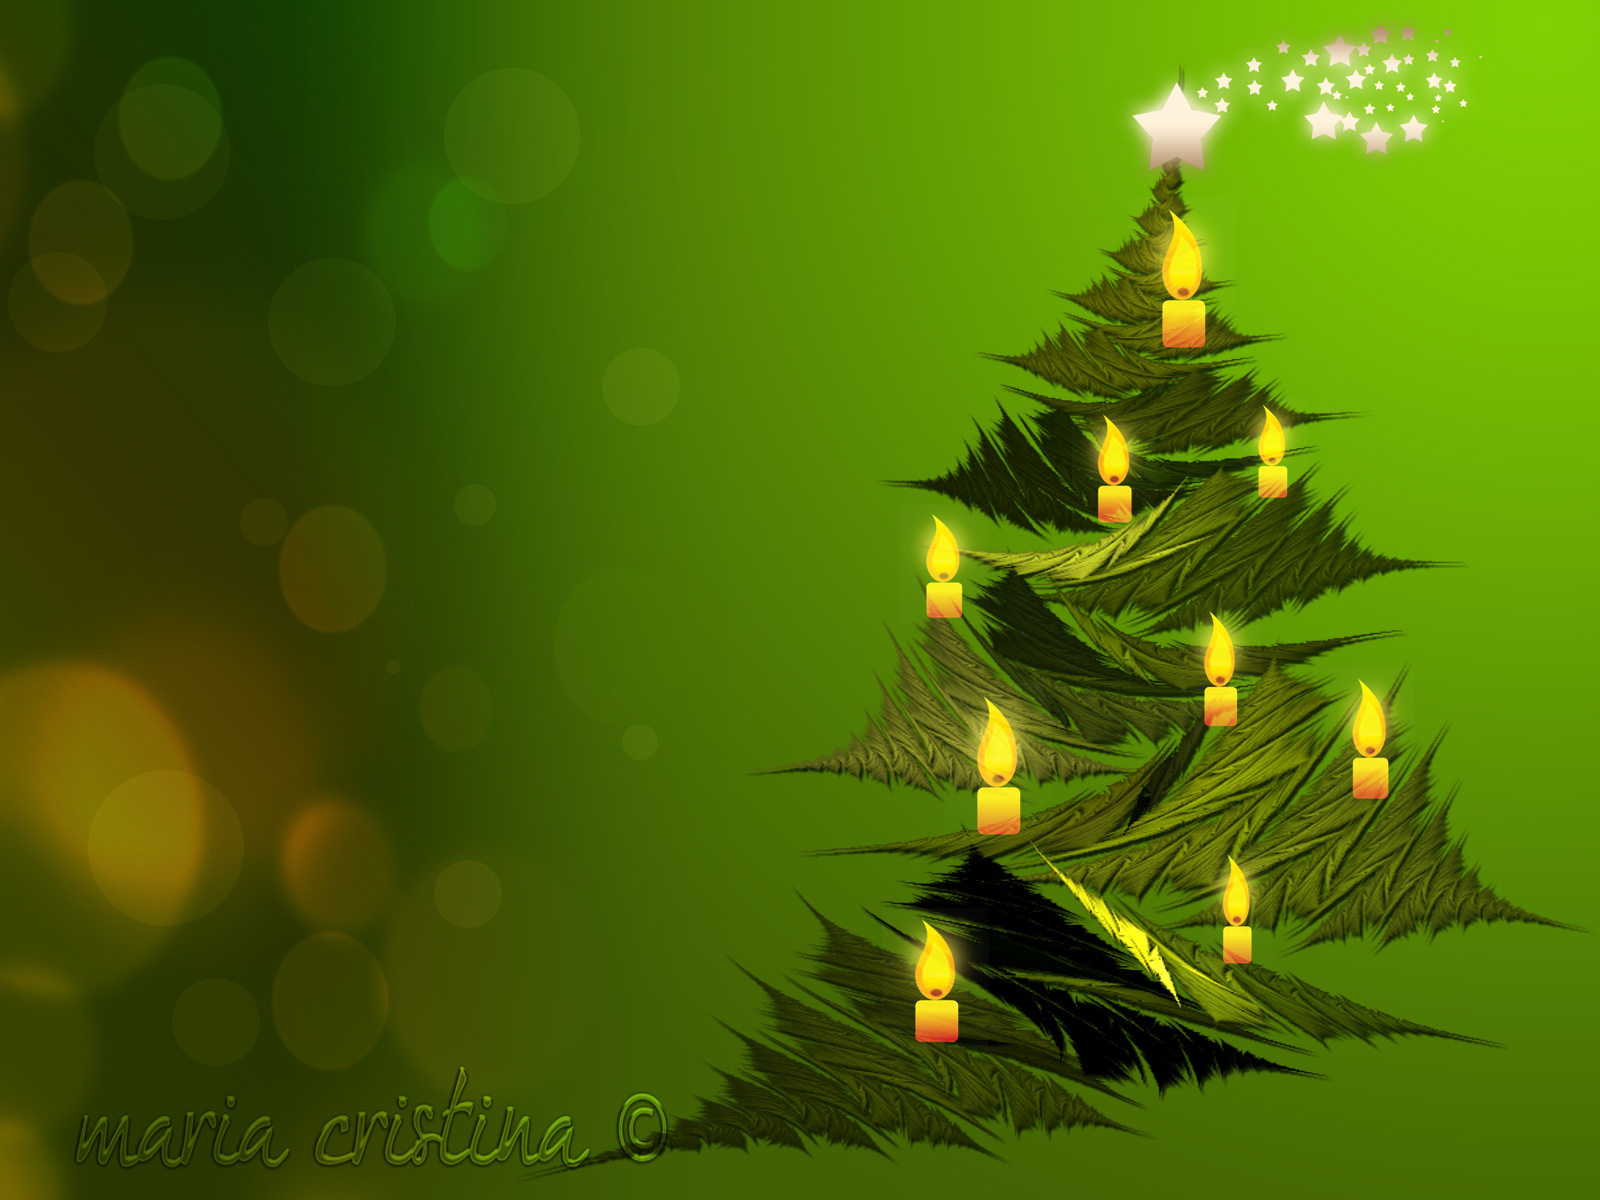 All My Pictures My Wallpapers Christmas Tree   wallpaper